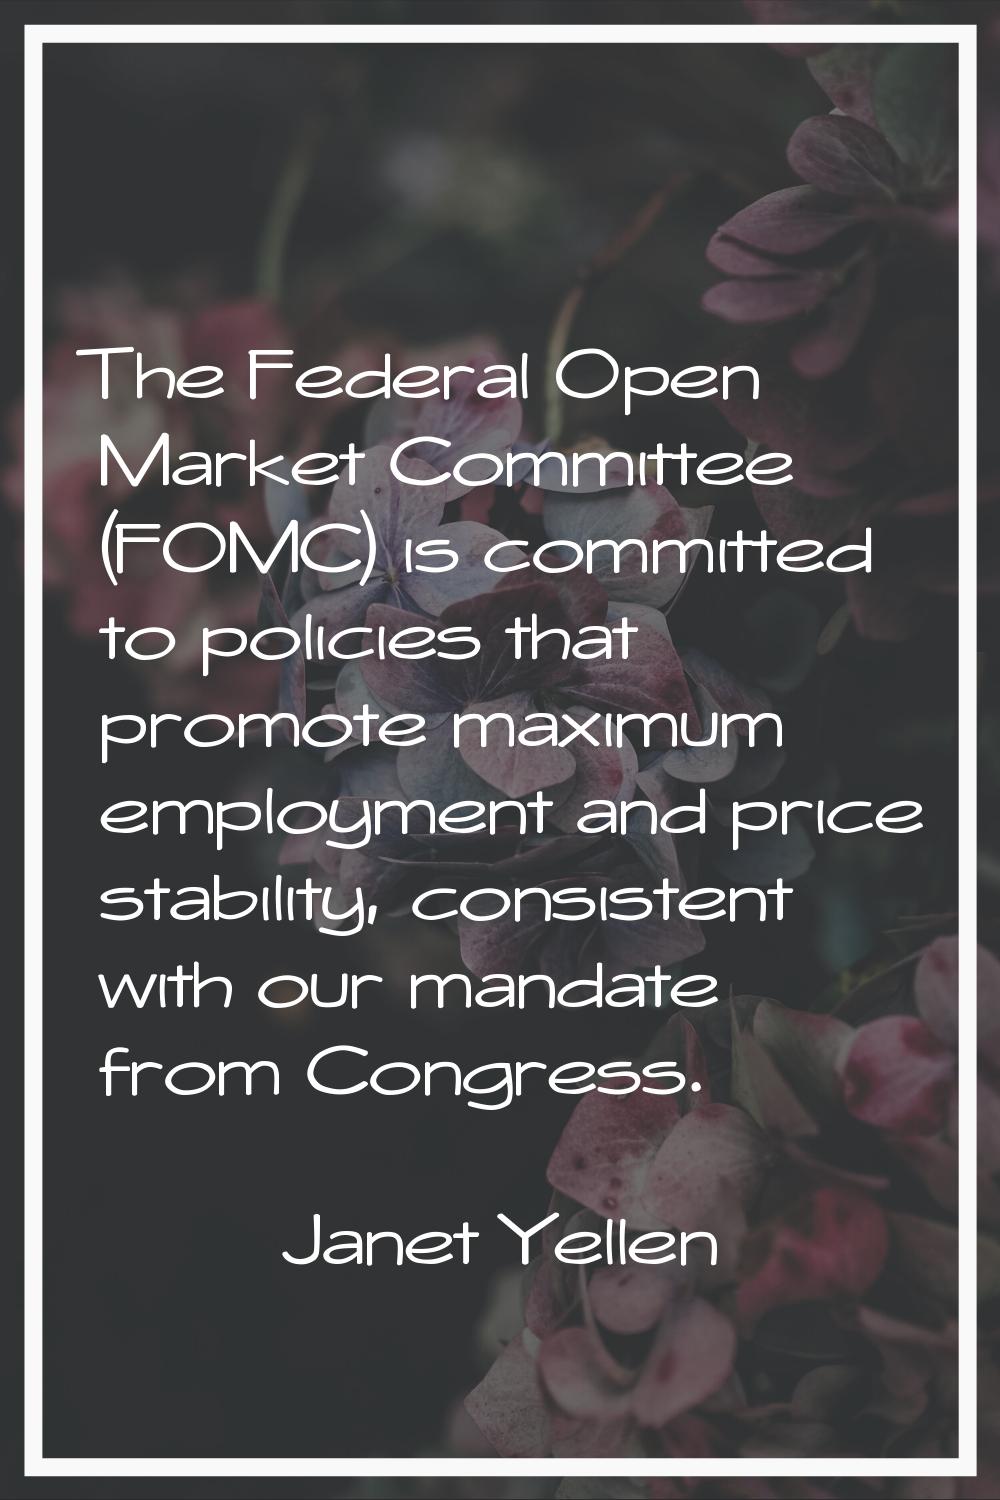 The Federal Open Market Committee (FOMC) is committed to policies that promote maximum employment a